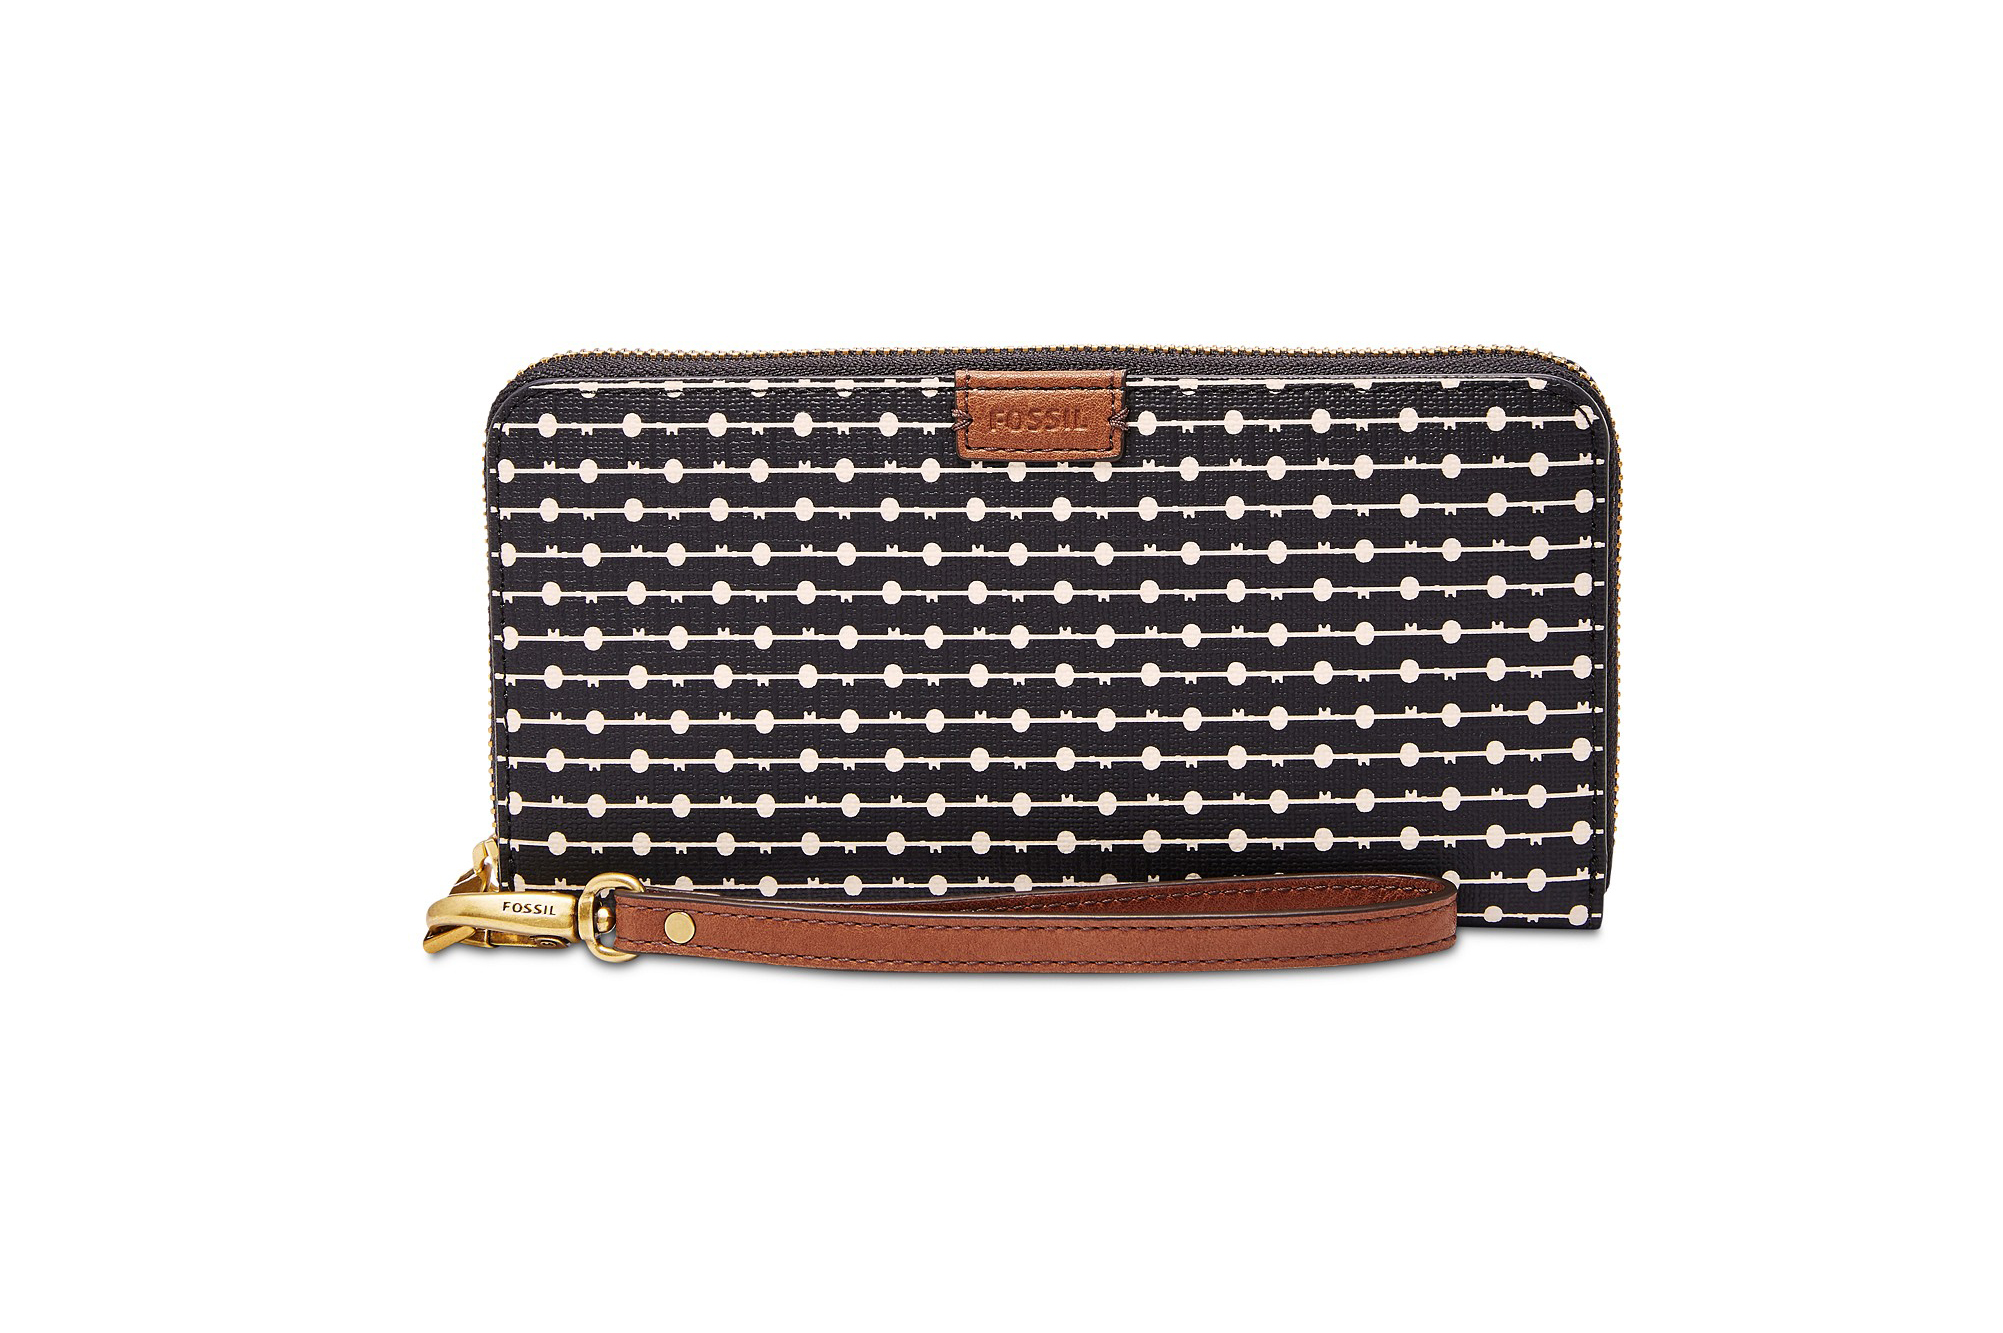 This Cute, All-in-One Clutch Offers an Extra Layer of Protection